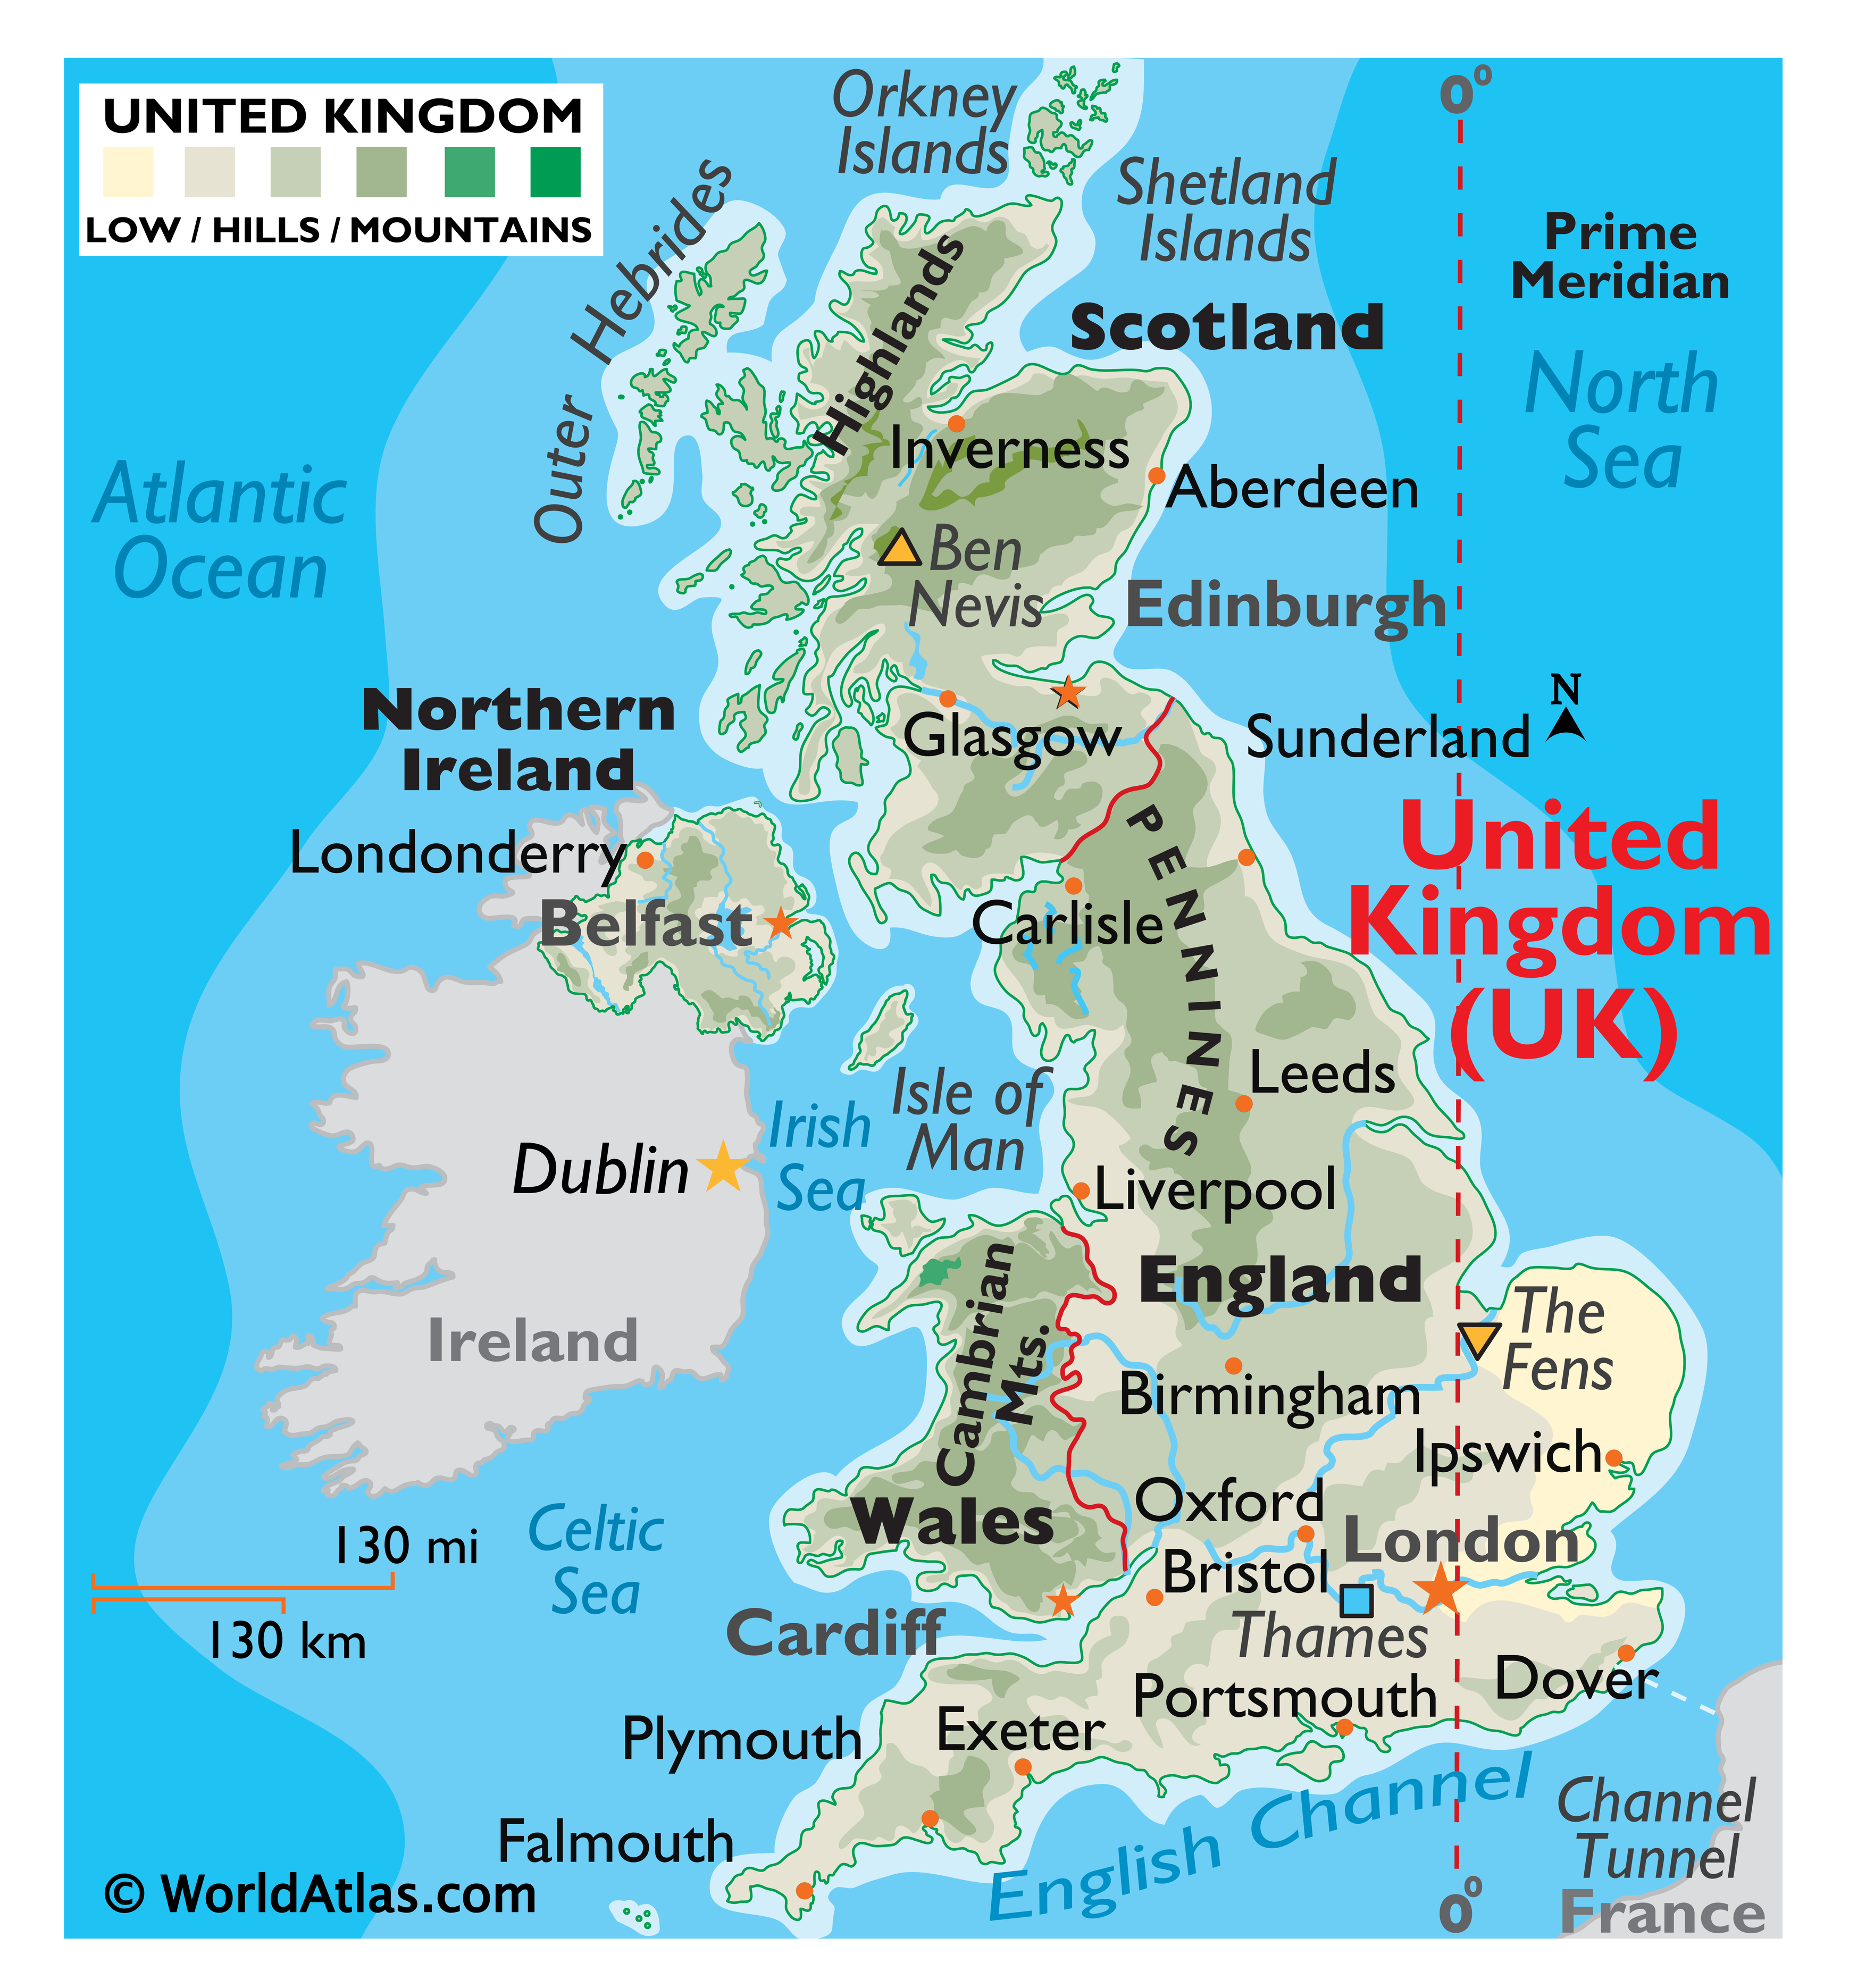 The United Kingdom of great Britain and Northern Ireland карта. Карта uk of great Britain. Map og great Britain. Карта the uk of great Britain and Northern Ireland. Great britain and northern island